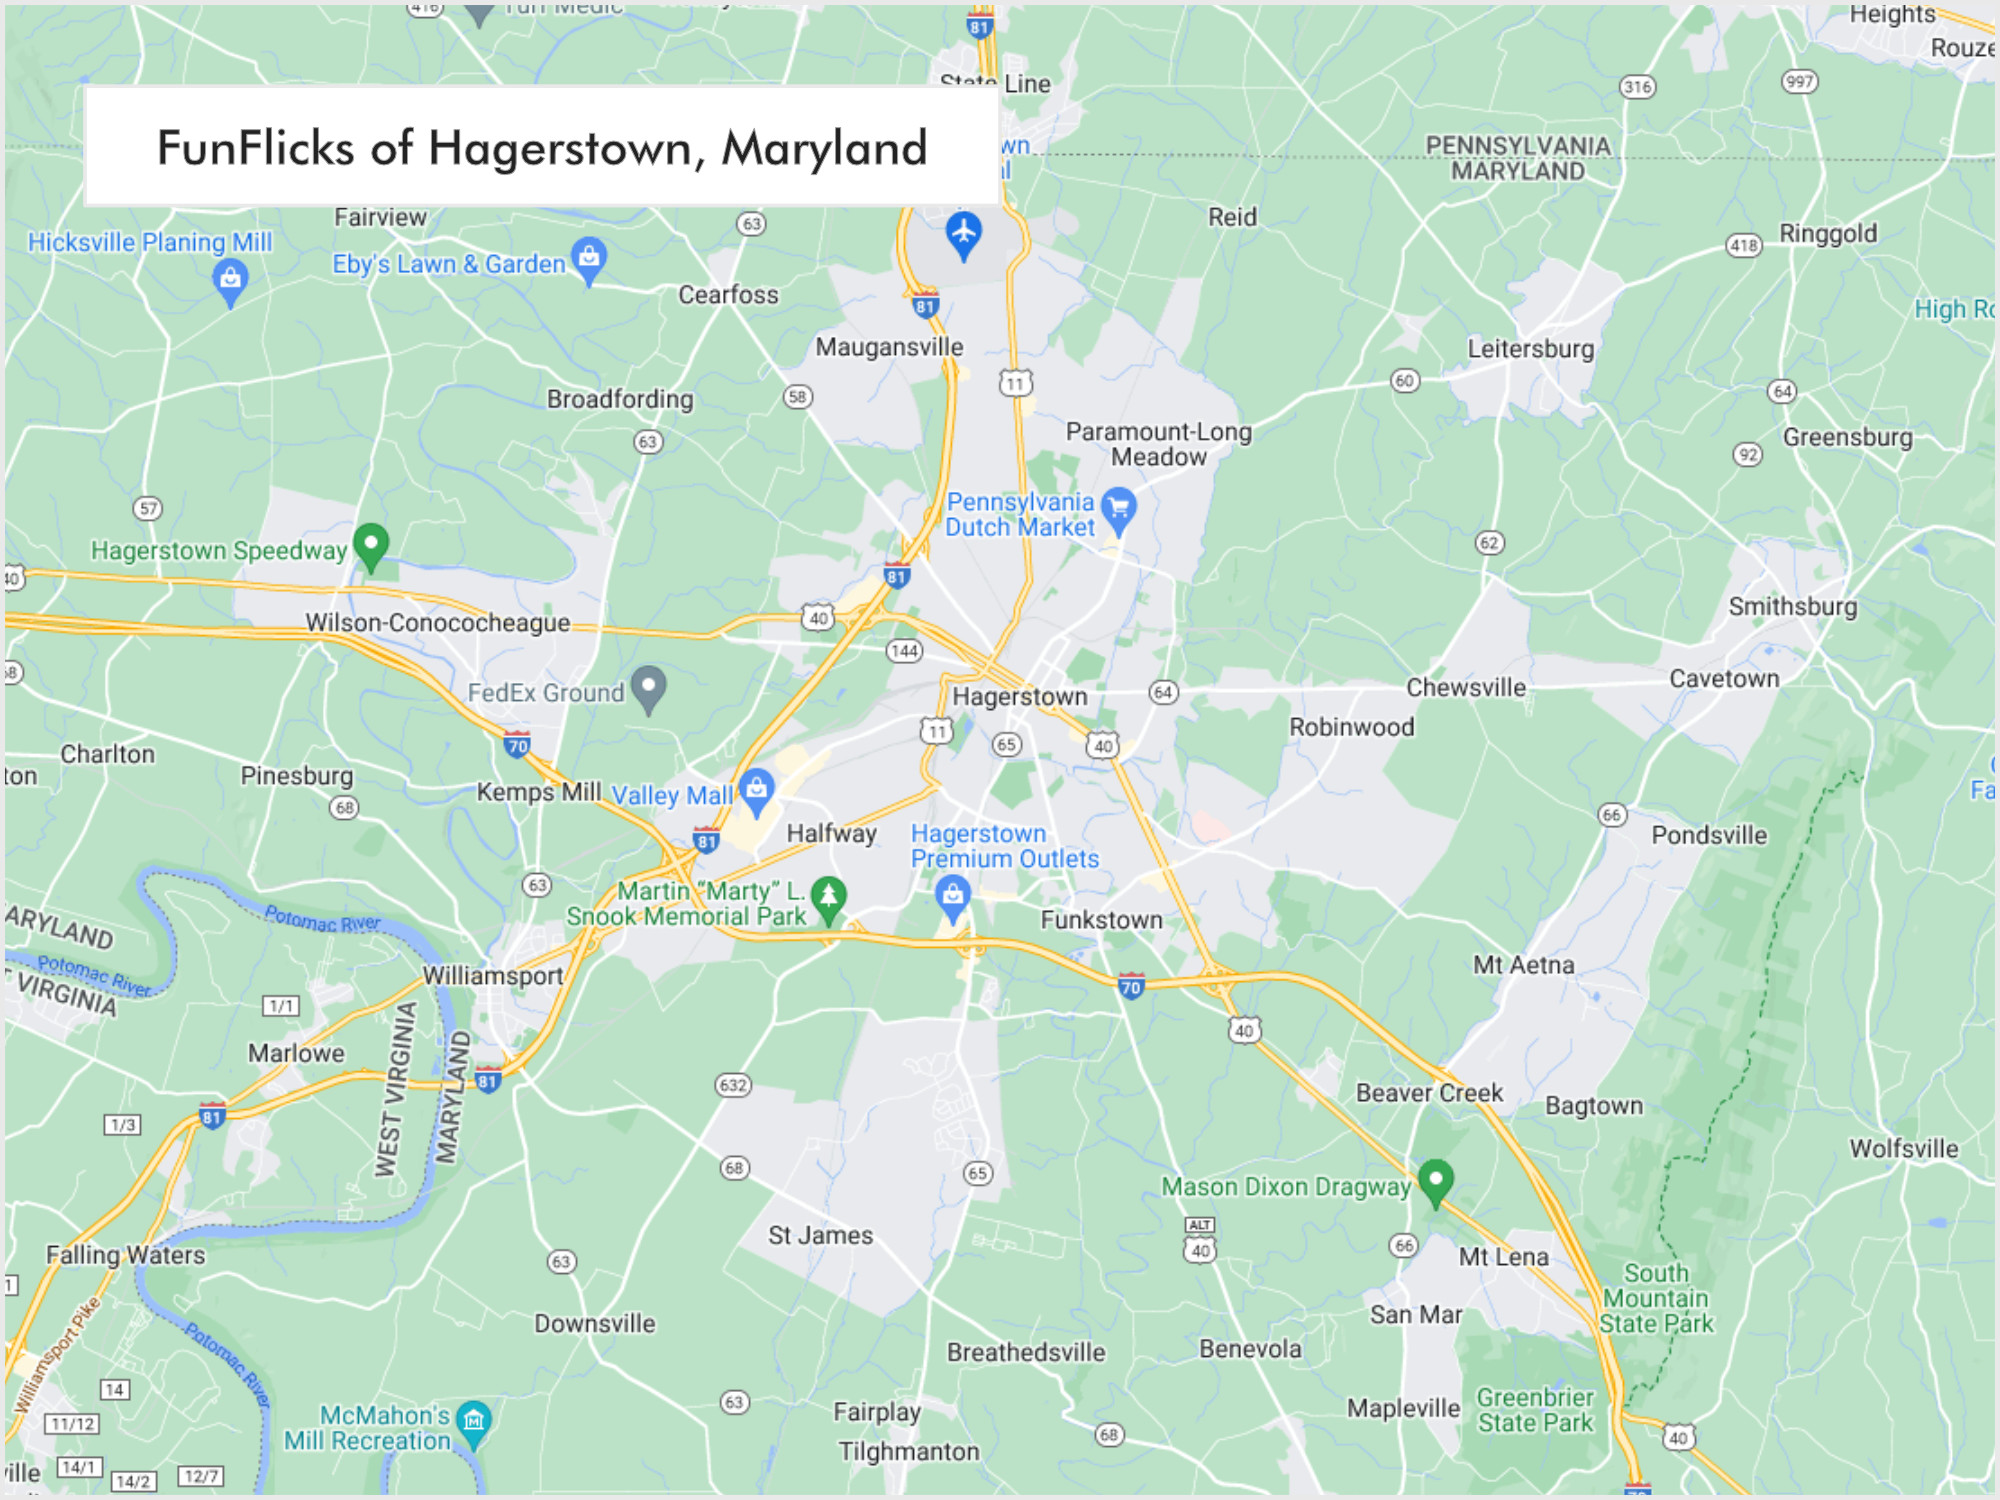 FunFlicks® Hagerstown territory map